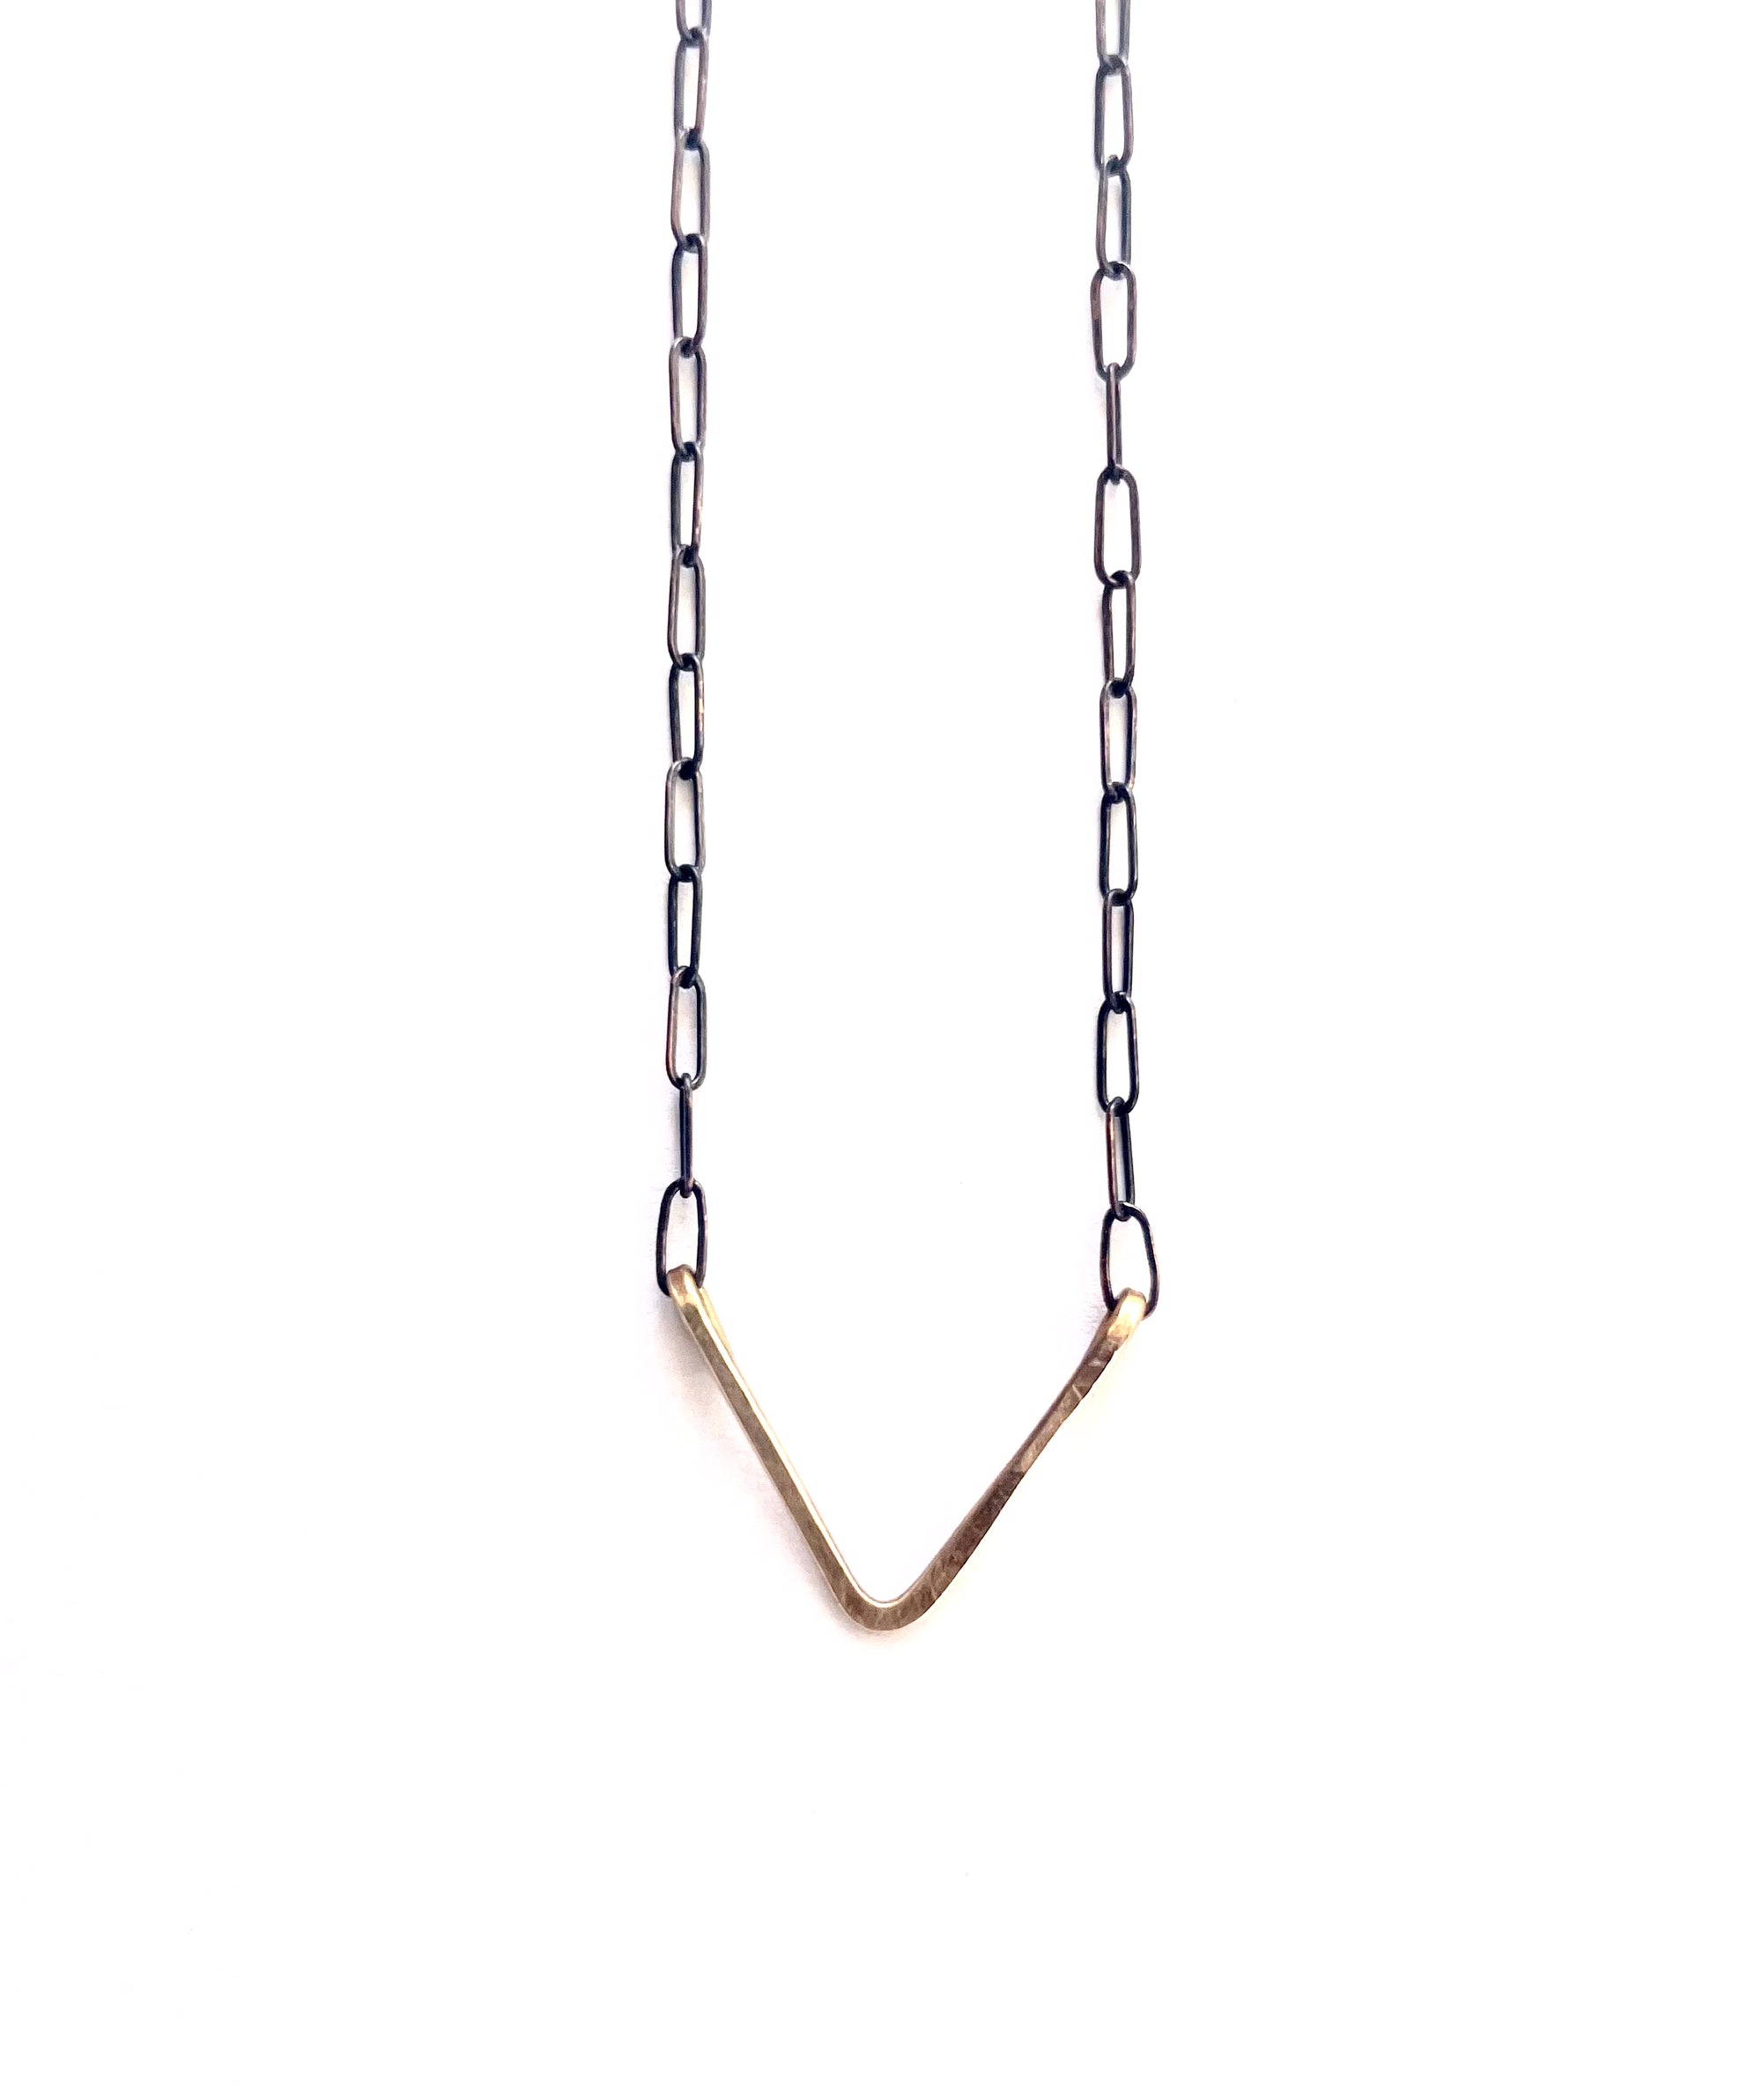 Vee on Chain Necklace, Small